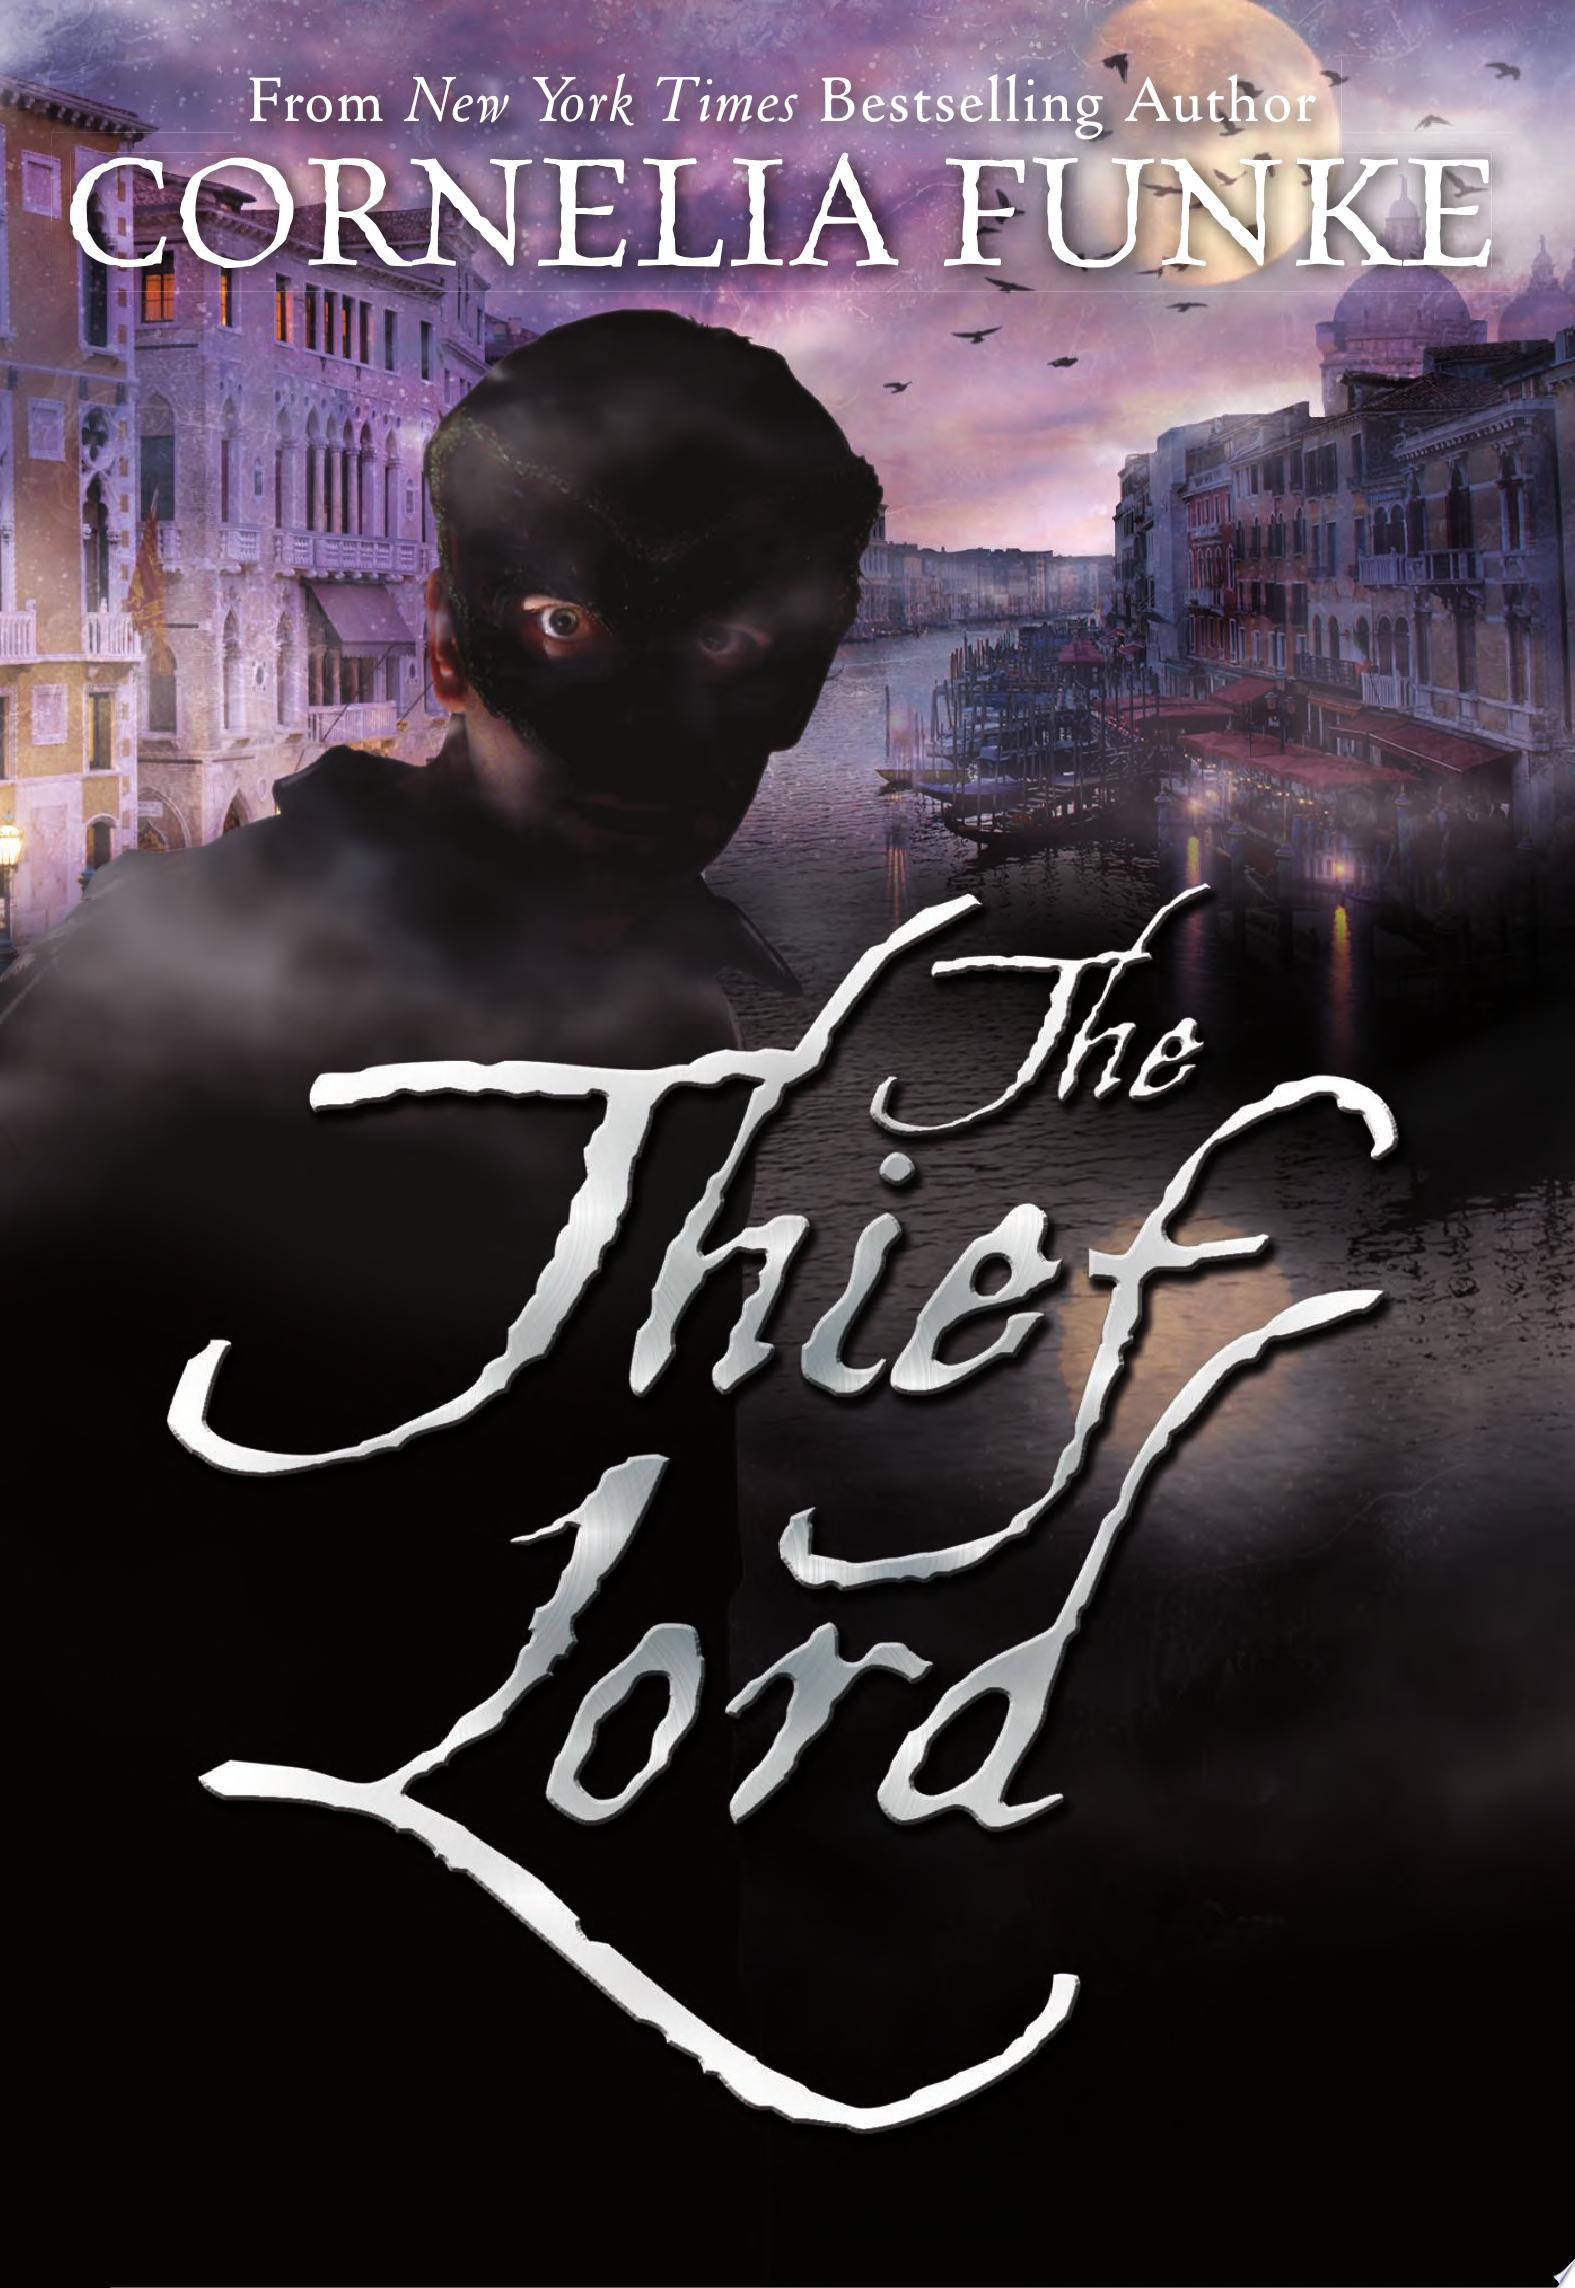 Image for "The Thief Lord"